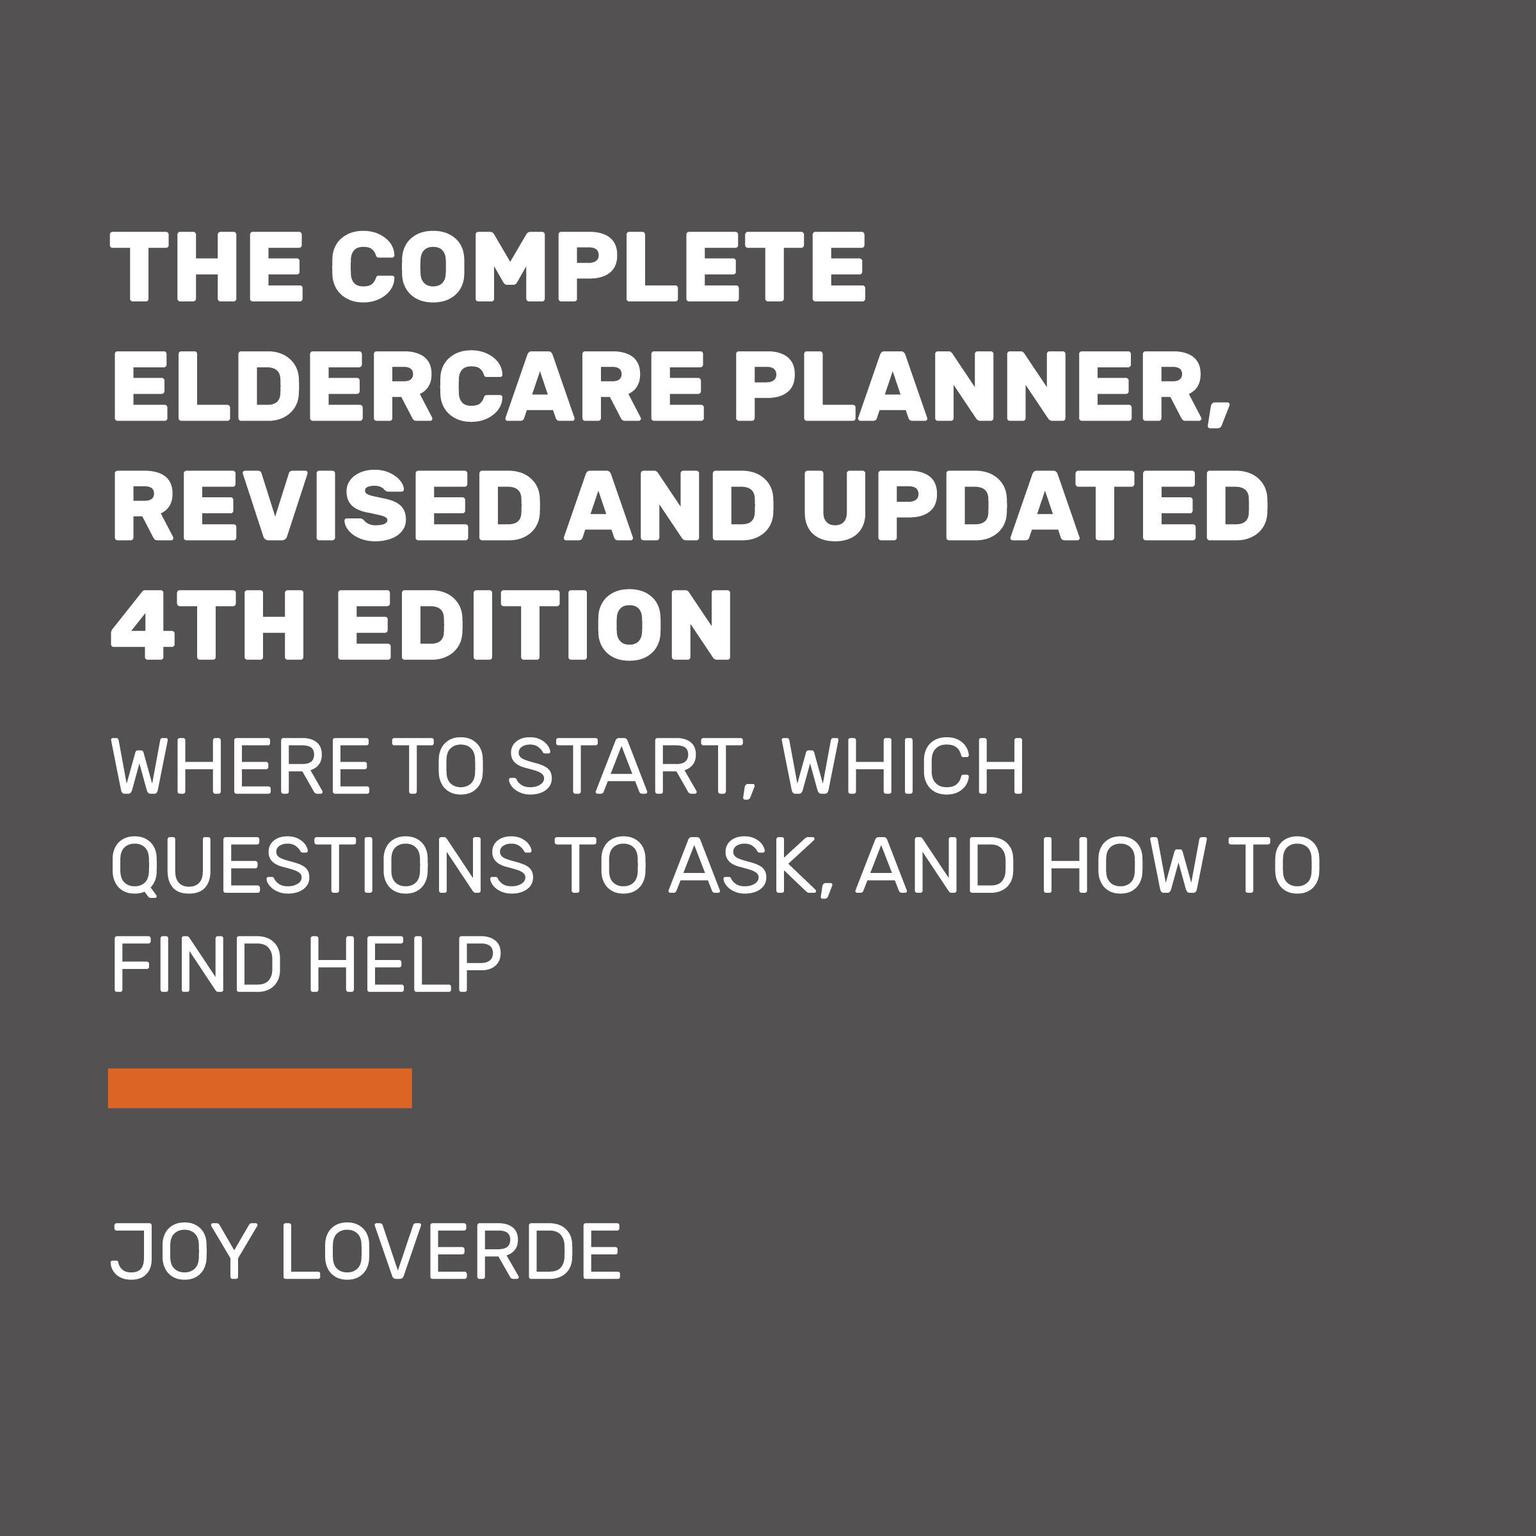 The Complete Eldercare Planner, Revised and Updated 4th Edition: Where to Start, Which Questions to Ask, and How to Find Help Audiobook, by Joy Loverde